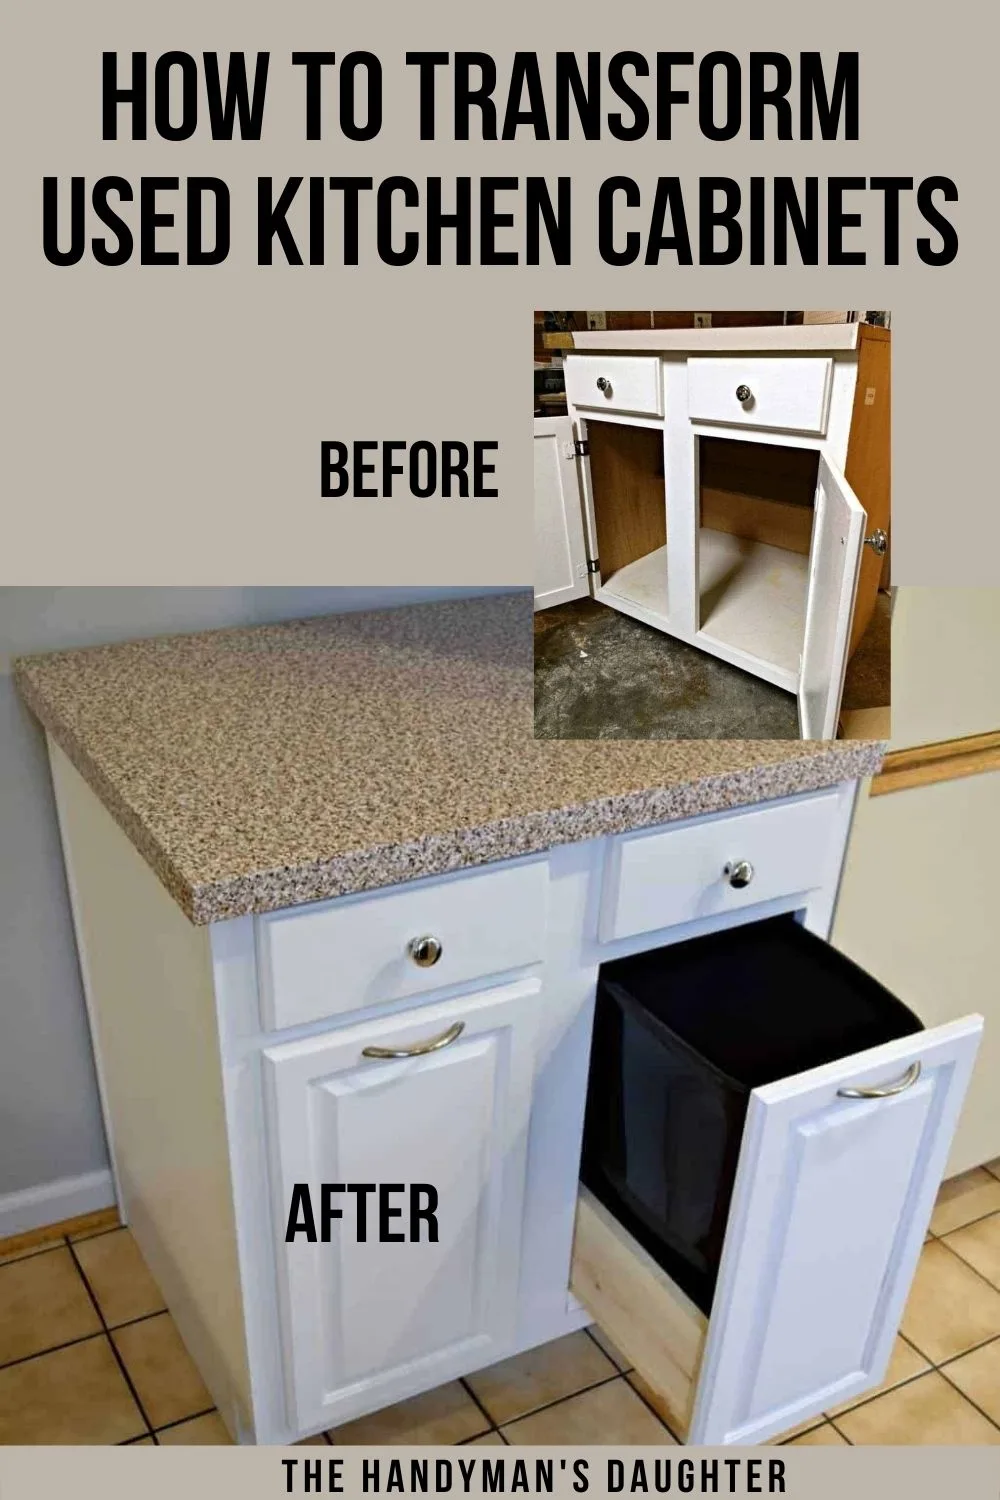 image before and after of used kitchen cabinet with text overlay